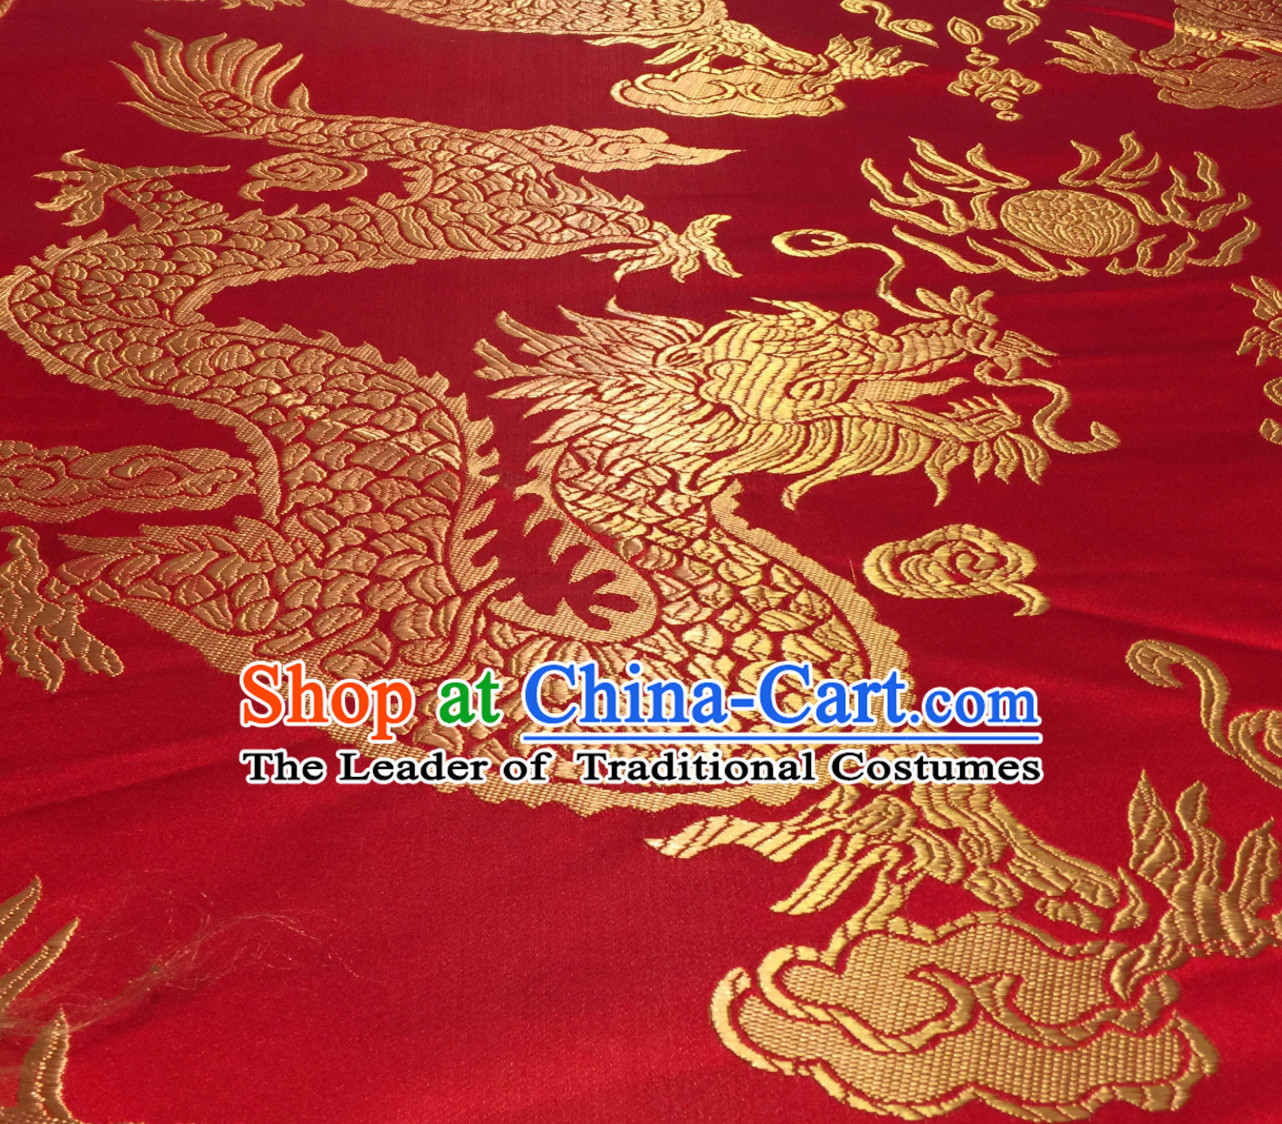 Red Asian Chinese Royal Palace Style Traditional Dragon Pattern Design Brocade Fabric Silk Fabric Chinese Fabric Asian Material